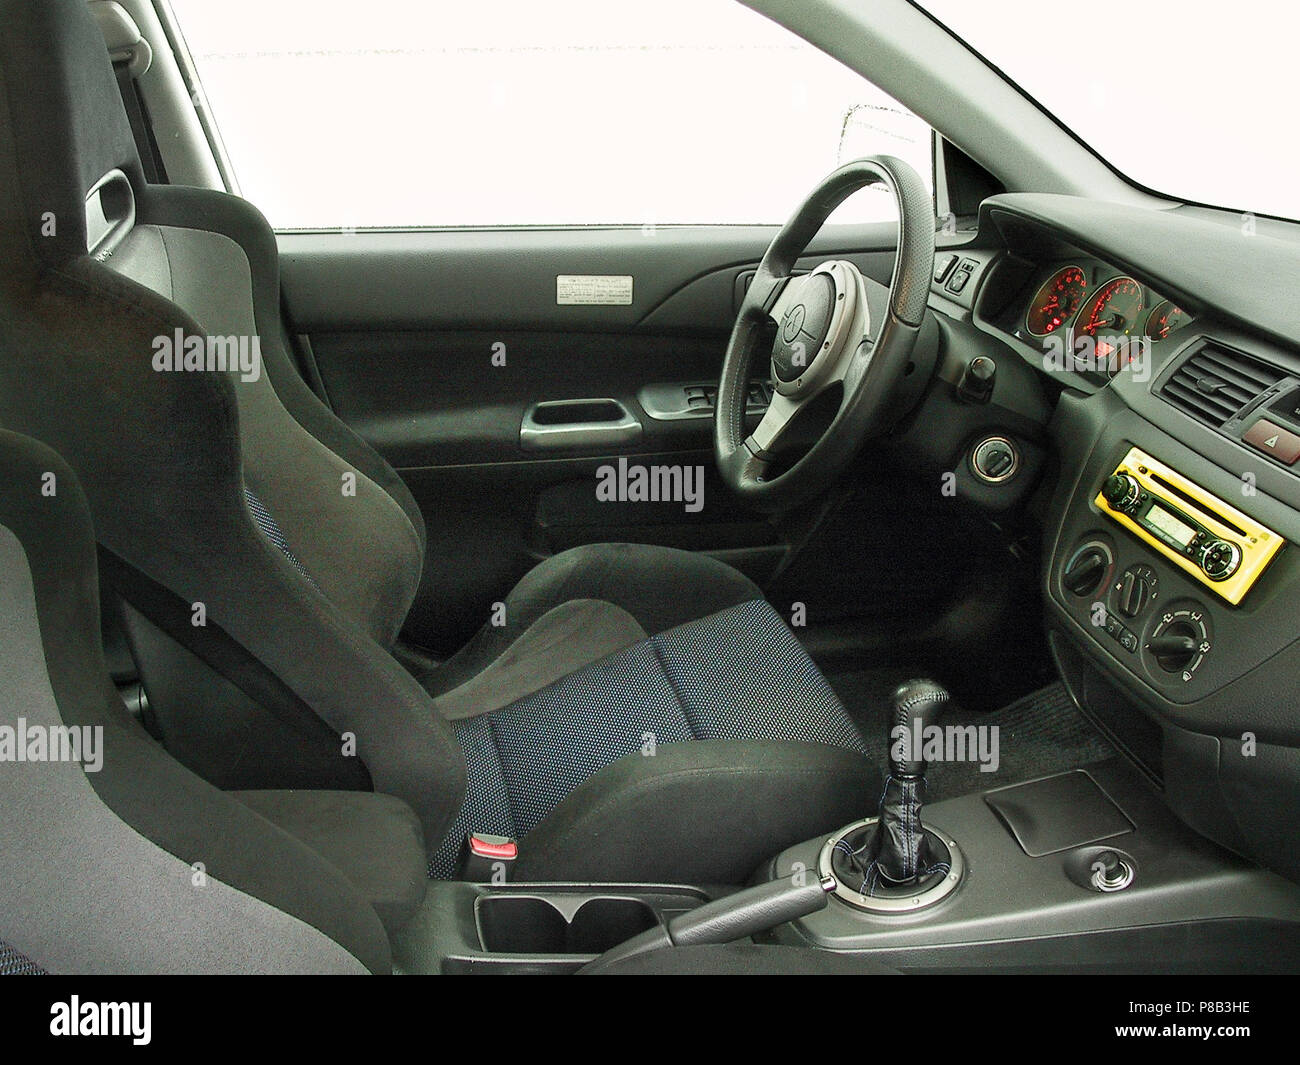 Mitsubishi Lancer Evolution 7 vii EVO - 2002 model in lightening yellow  colour - showing seating and interior Stock Photo - Alamy